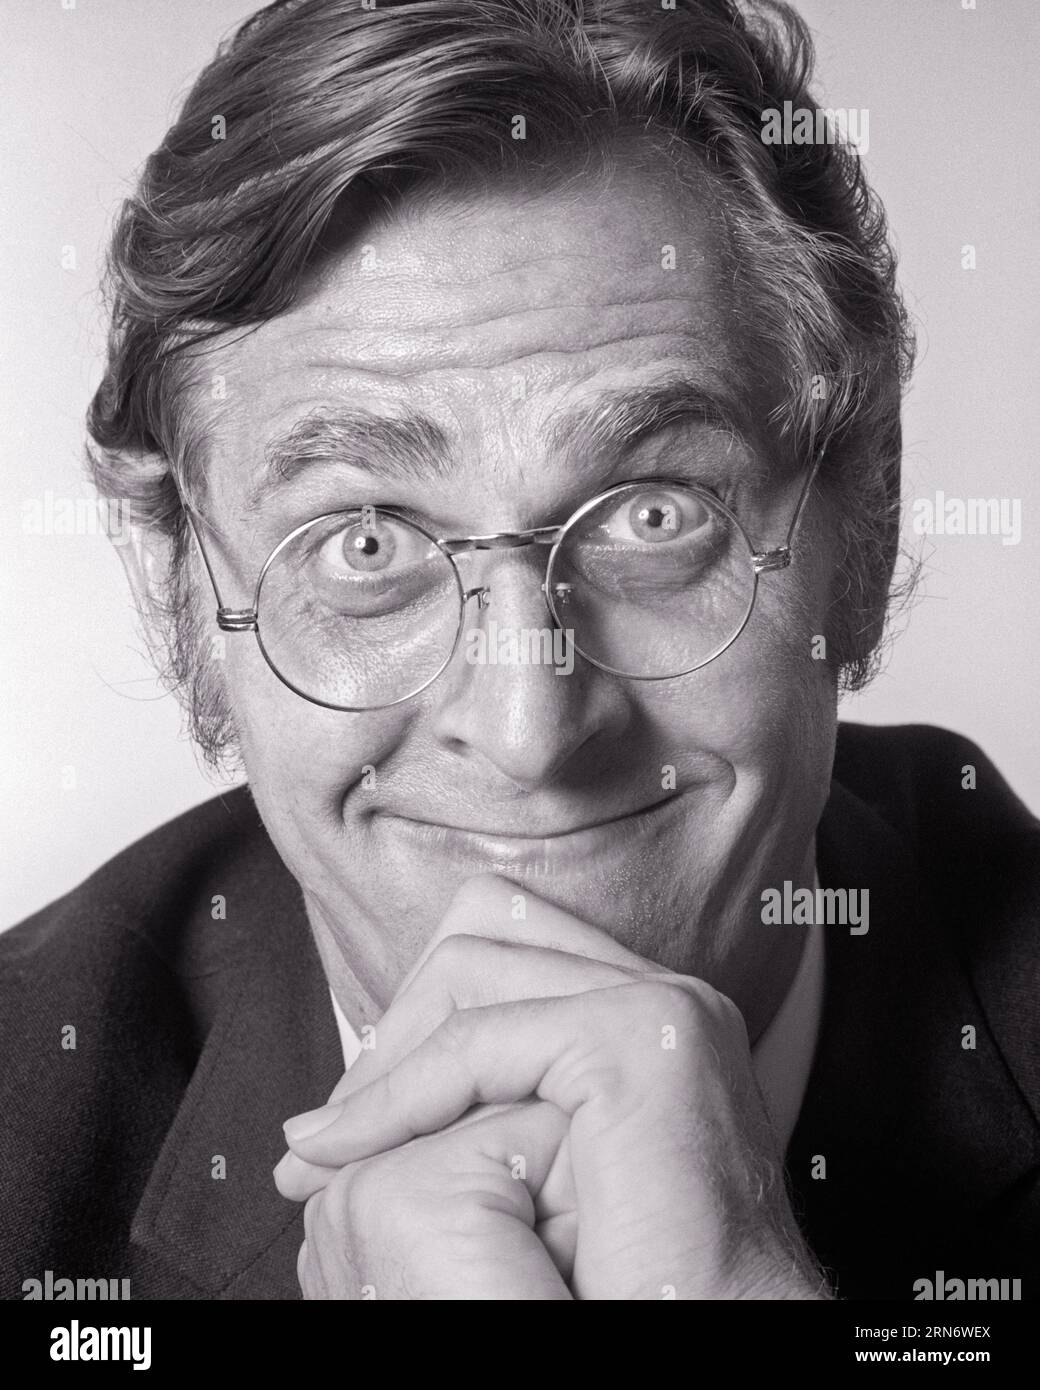 1970s PORTRAIT MAN RESTING HIS CHIN ON CLASPED HANDS SMILING WEARING ROUND METAL FRAME EYEGLASSES FUNNY FACIAL EXPRESSION - p7960 HAR001 HARS SATISFACTION STUDIO SHOT COPY SPACE ASKING PERSONS MALES CHIN CONFIDENCE EYEGLASSES EXPRESSIONS B&W RESTING WIDE EYE CONTACT BIZARRE BUG-EYED HUMOROUS STARING HAPPINESS WEIRD HEAD AND SHOULDERS CHEERFUL HIS GROTESQUE EXCITEMENT ZANY COMICAL UNCONVENTIONAL ANTICIPATION SMILES CLASPED COMEDY JOYFUL WACKY IDIOSYNCRATIC WIDE-EYED AMUSING EAGER ECCENTRIC GRIN MID-ADULT MID-ADULT MAN QUESTIONING STARTLED WIRE FRAME BLACK AND WHITE CAUCASIAN ETHNICITY ERRATIC Stock Photo